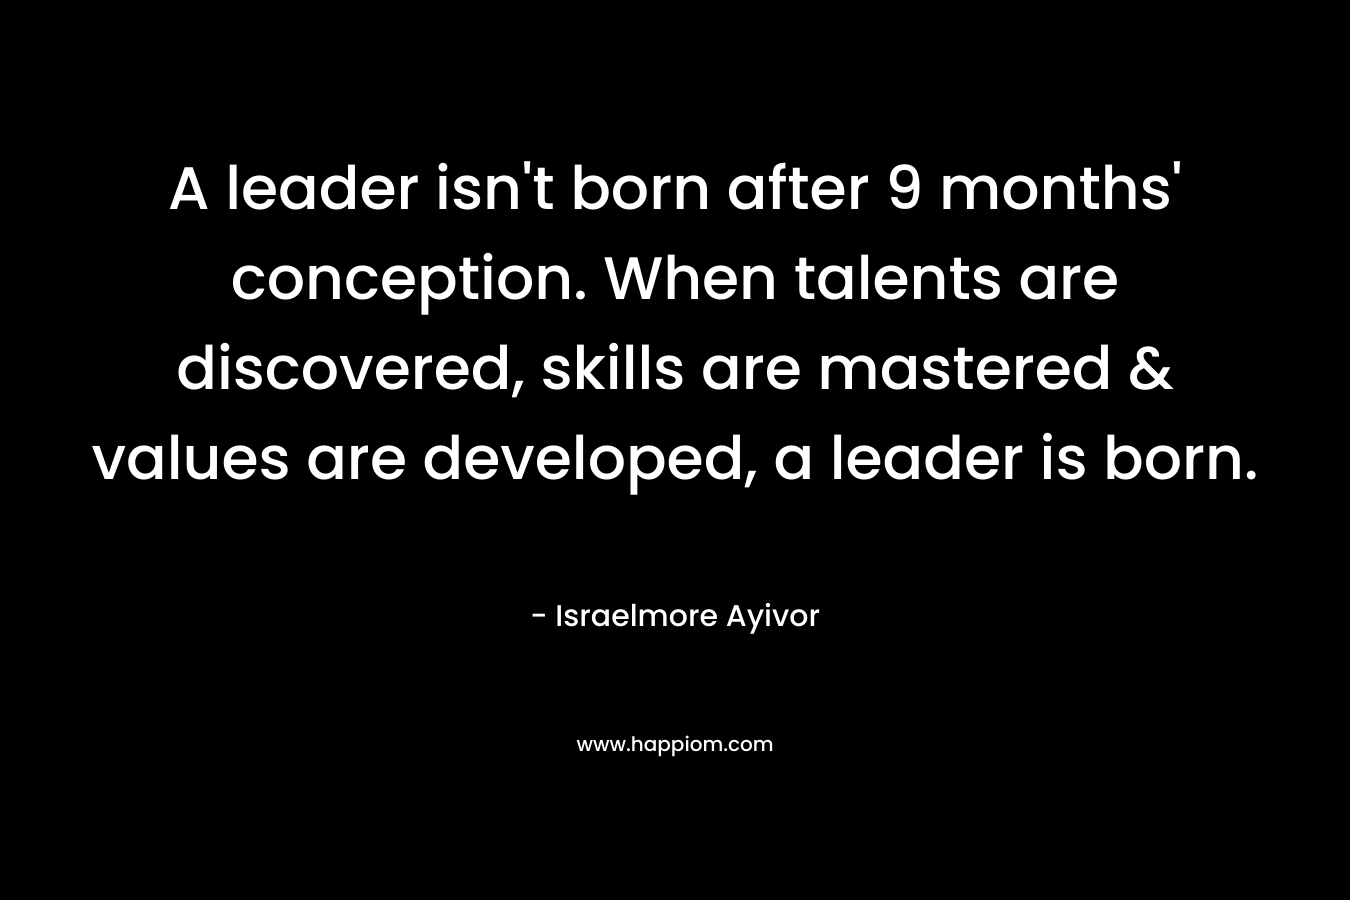 A leader isn't born after 9 months' conception. When talents are discovered, skills are mastered & values are developed, a leader is born.